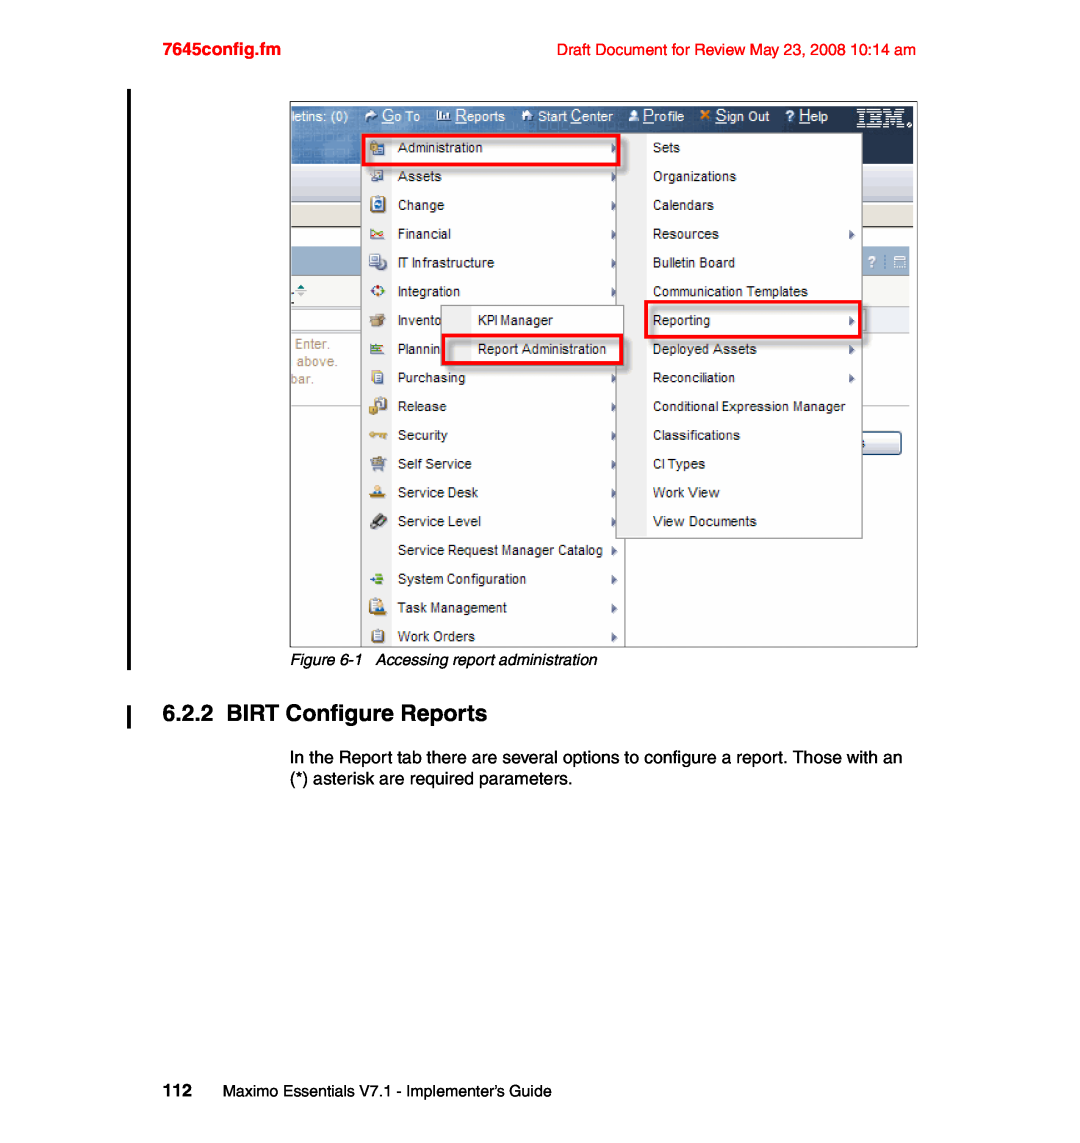 IBM SG24-7645-00 manual BIRT Configure Reports, 7645config.fm, asterisk are required parameters 